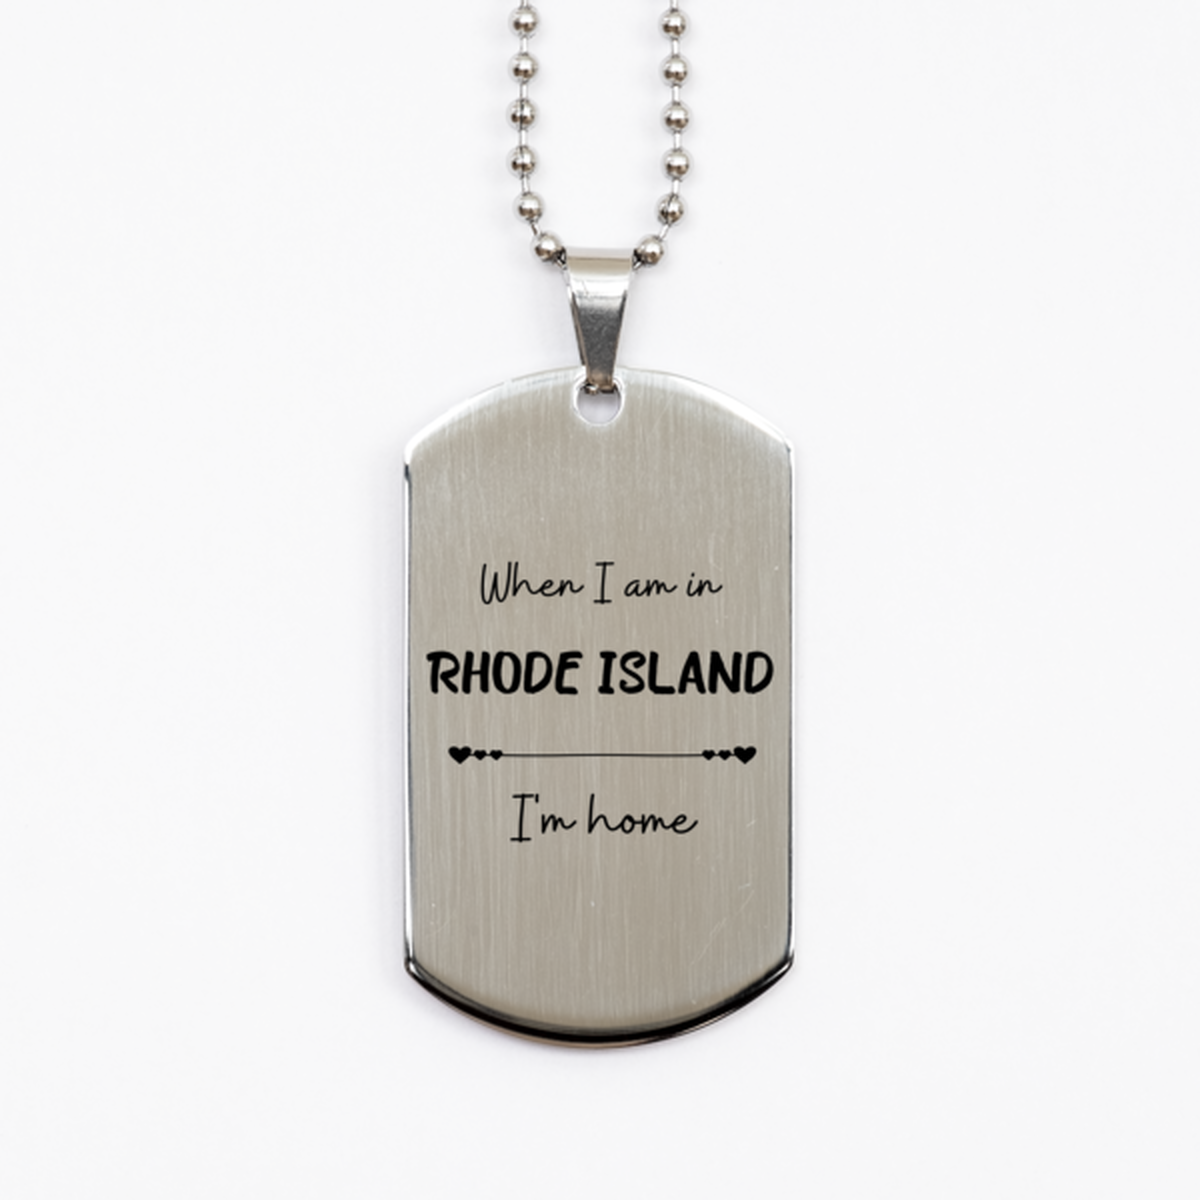 When I am in Rhode Island I'm home Silver Dog Tag, Cheap Gifts For Rhode Island, State Rhode Island Birthday Gifts for Friends Coworker